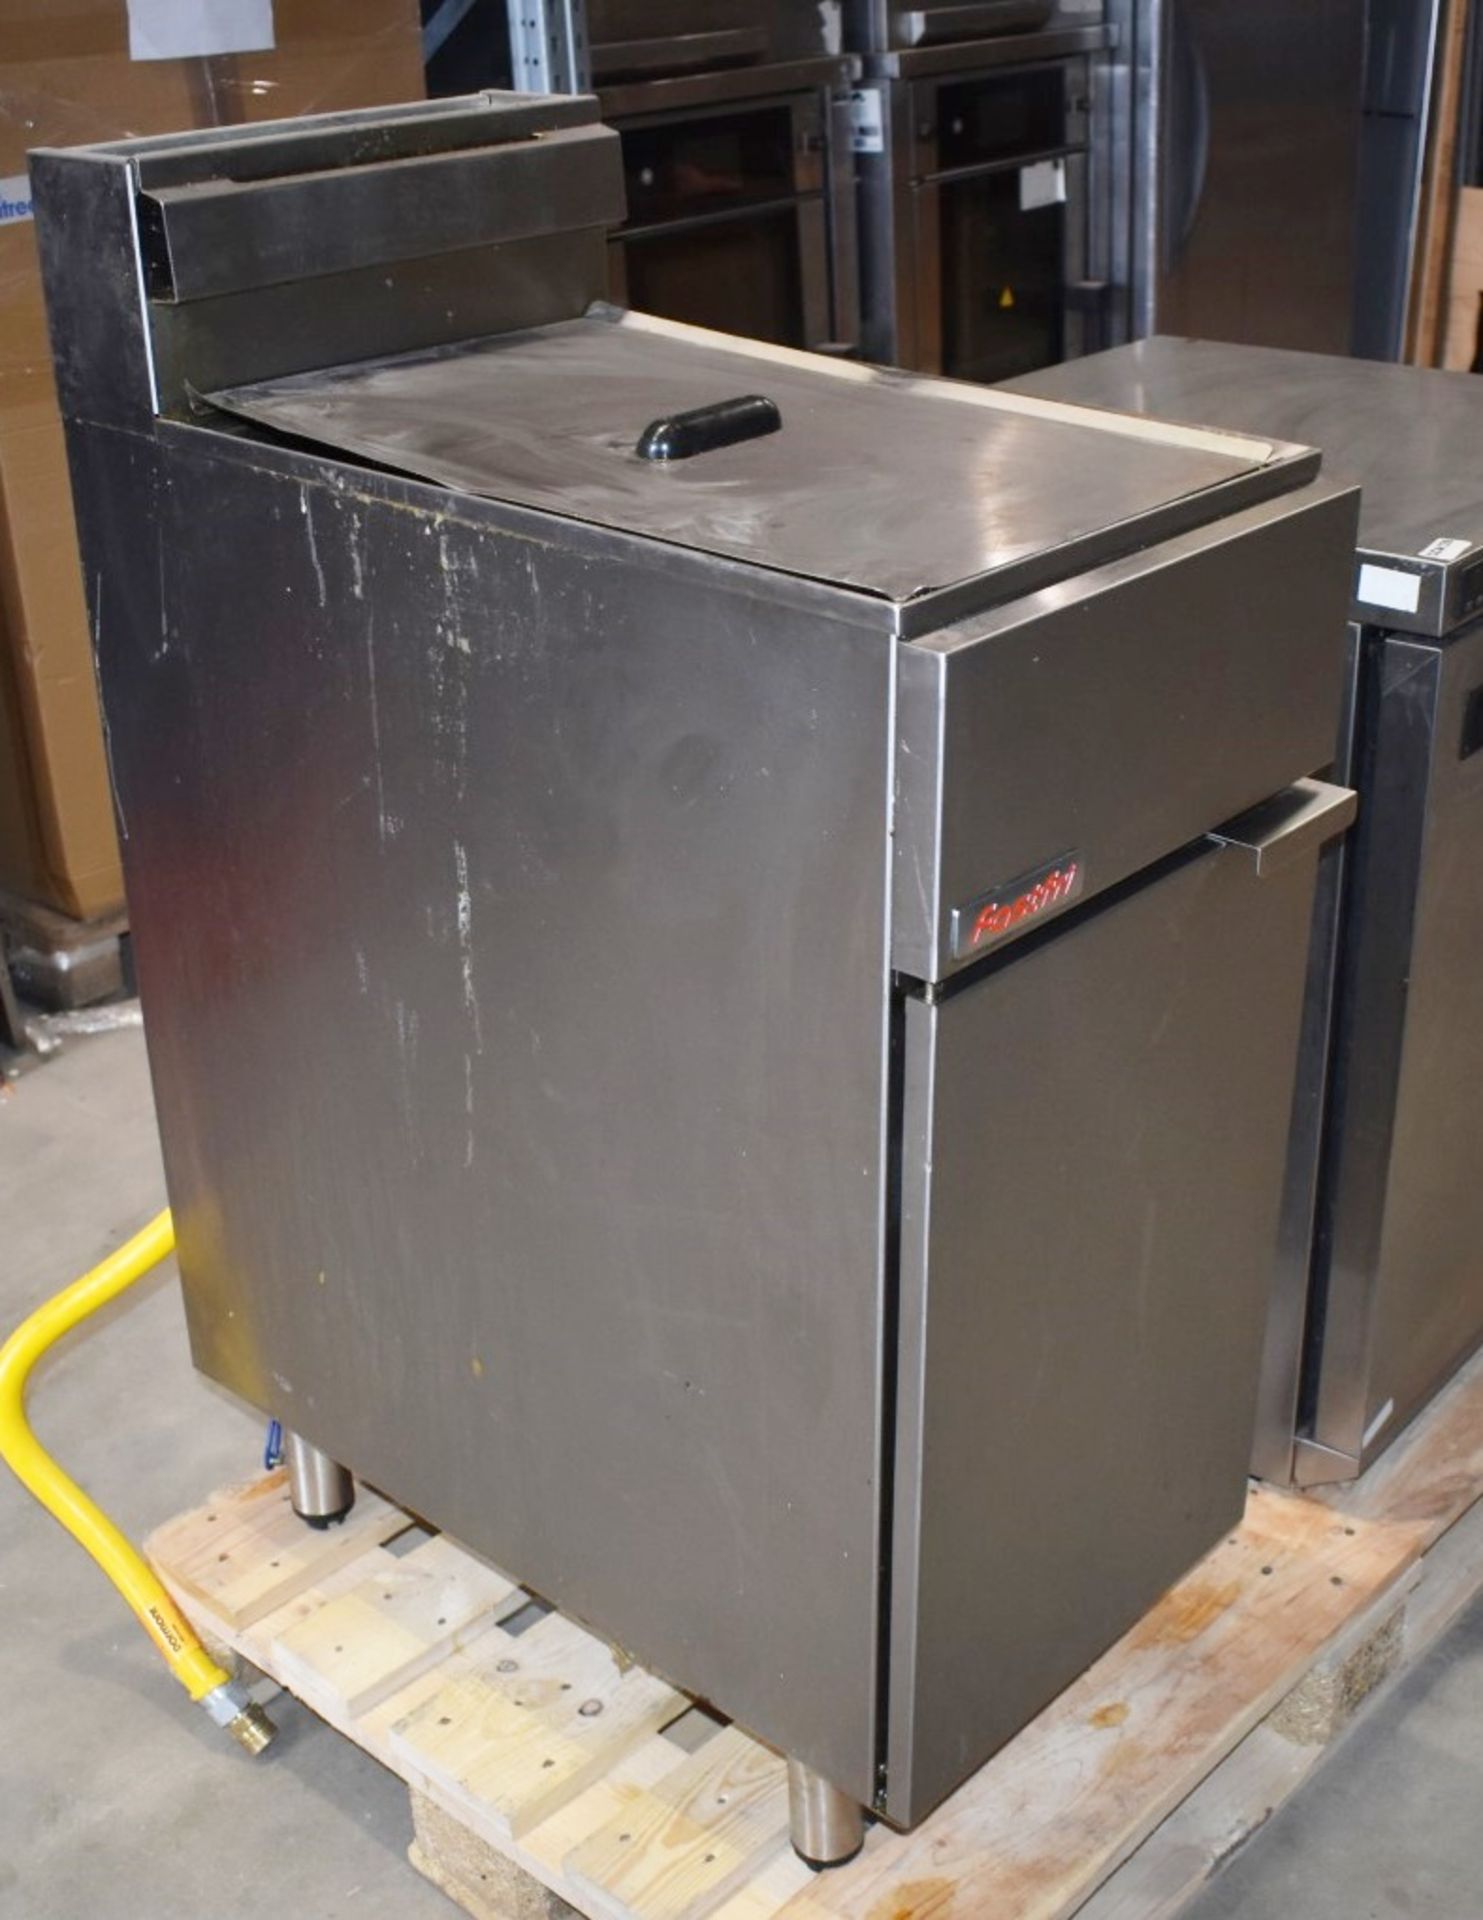 1 x Moffat Fast Fri FF18 Single Tank Commercial Gas Fryer With Stainless Steel Exterior